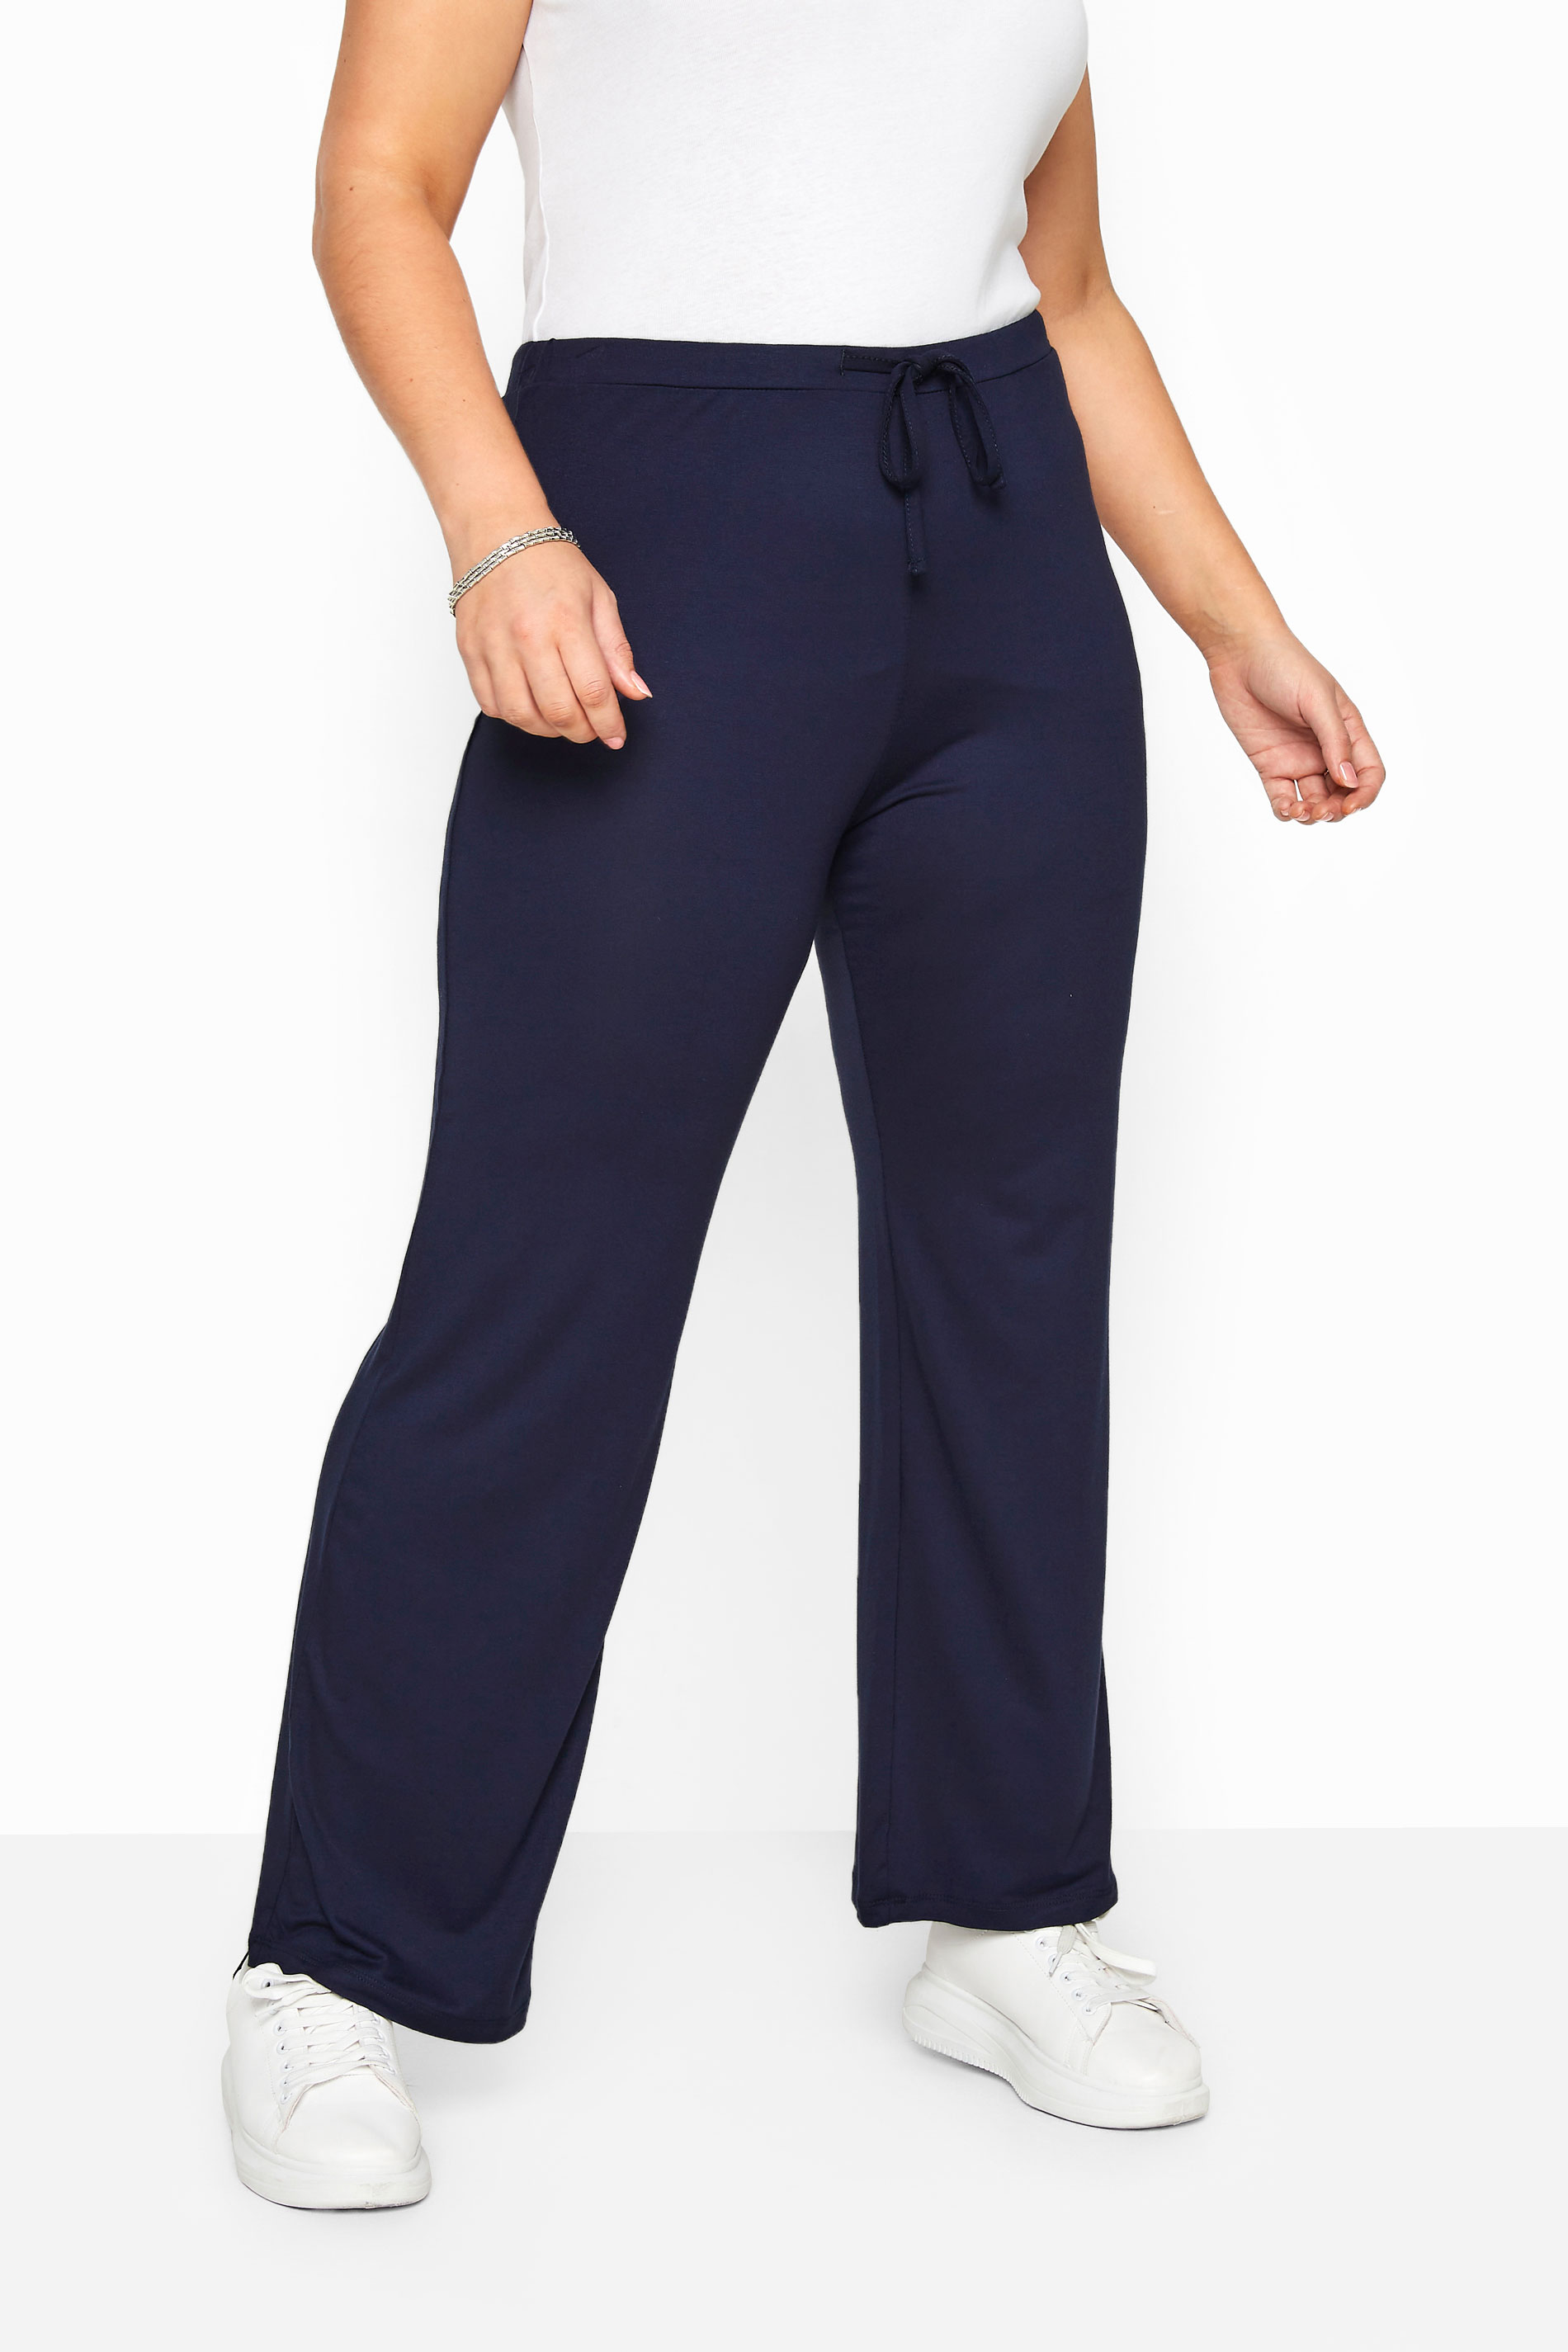 Plus Size Navy Blue Wide Leg Pull On Stretch Jersey Yoga Pants | Yours Clothing 1